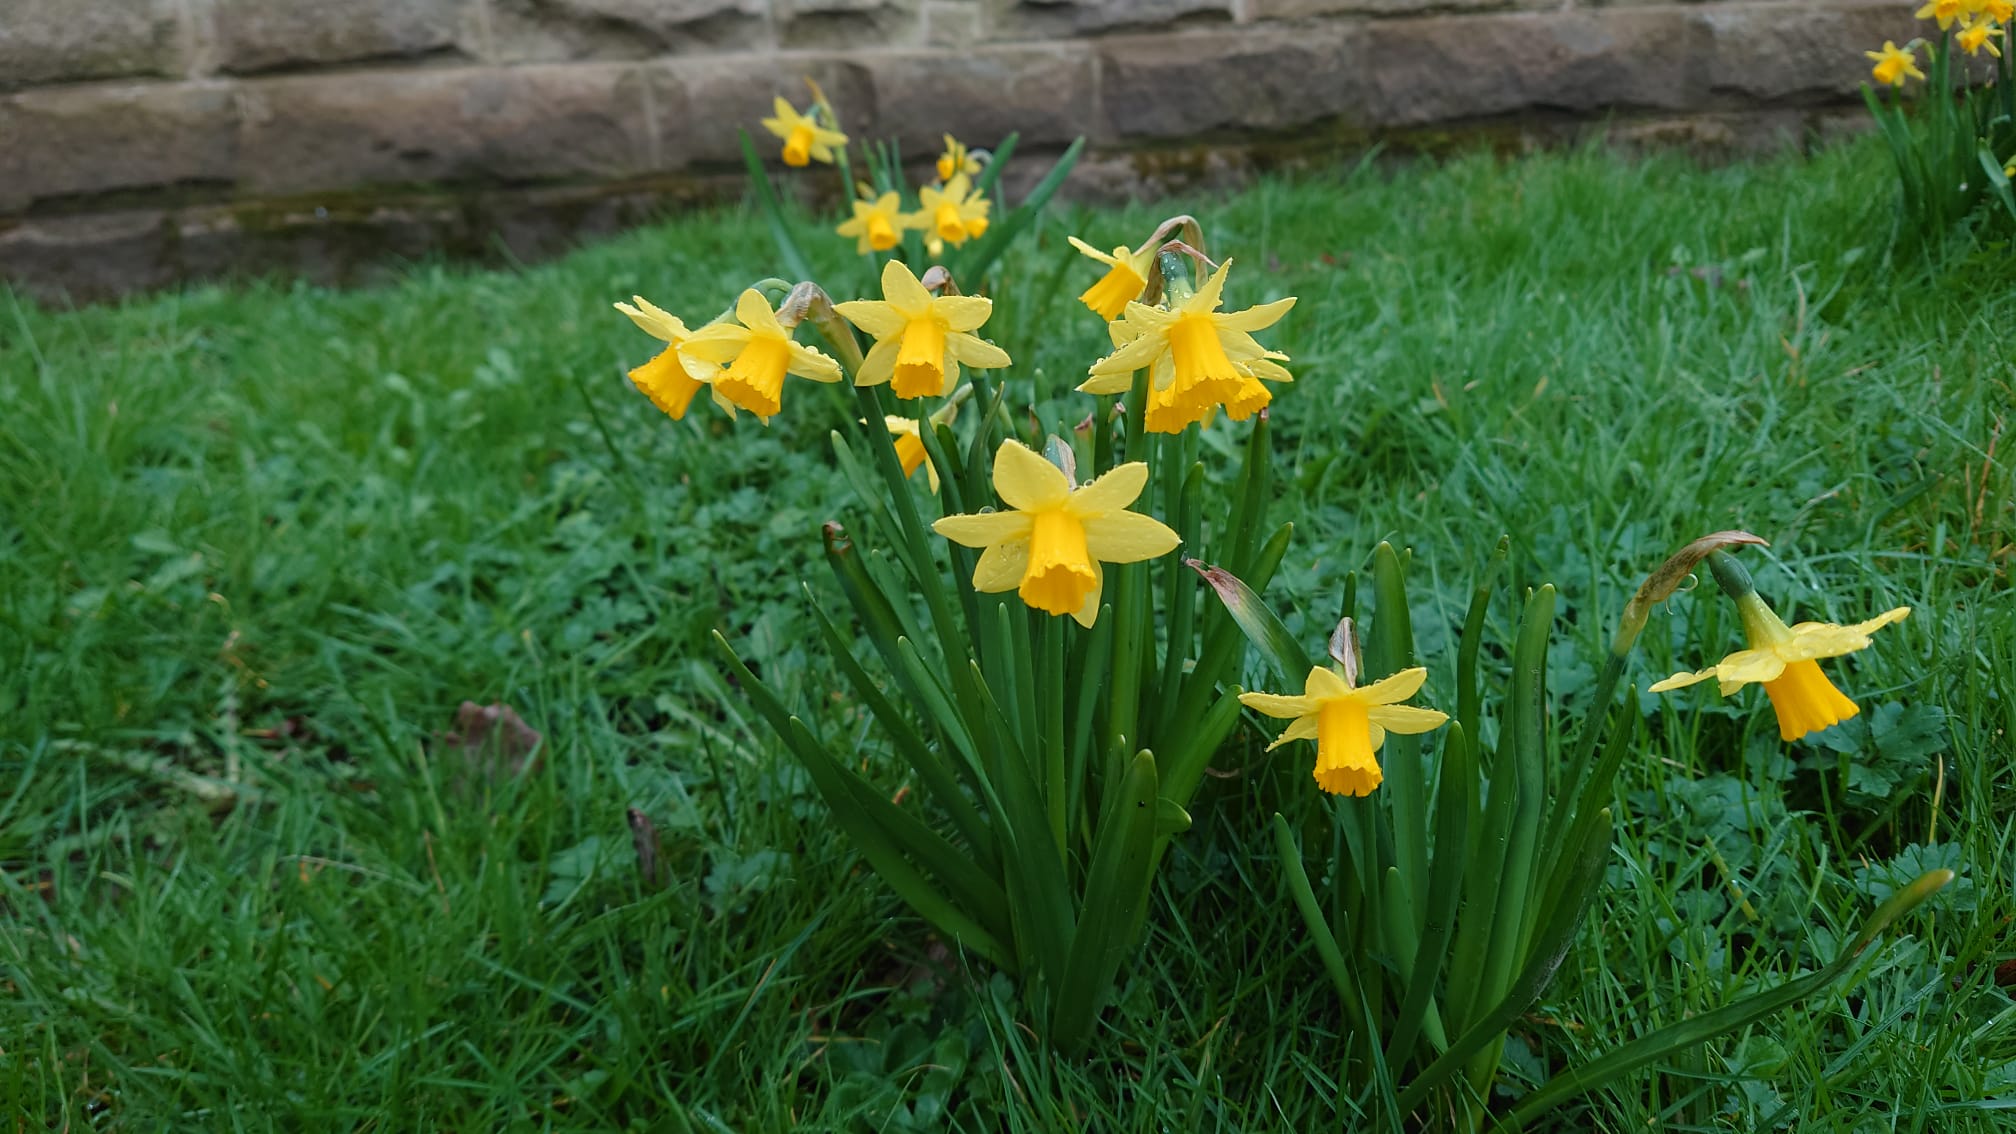 A photo of some daffodils